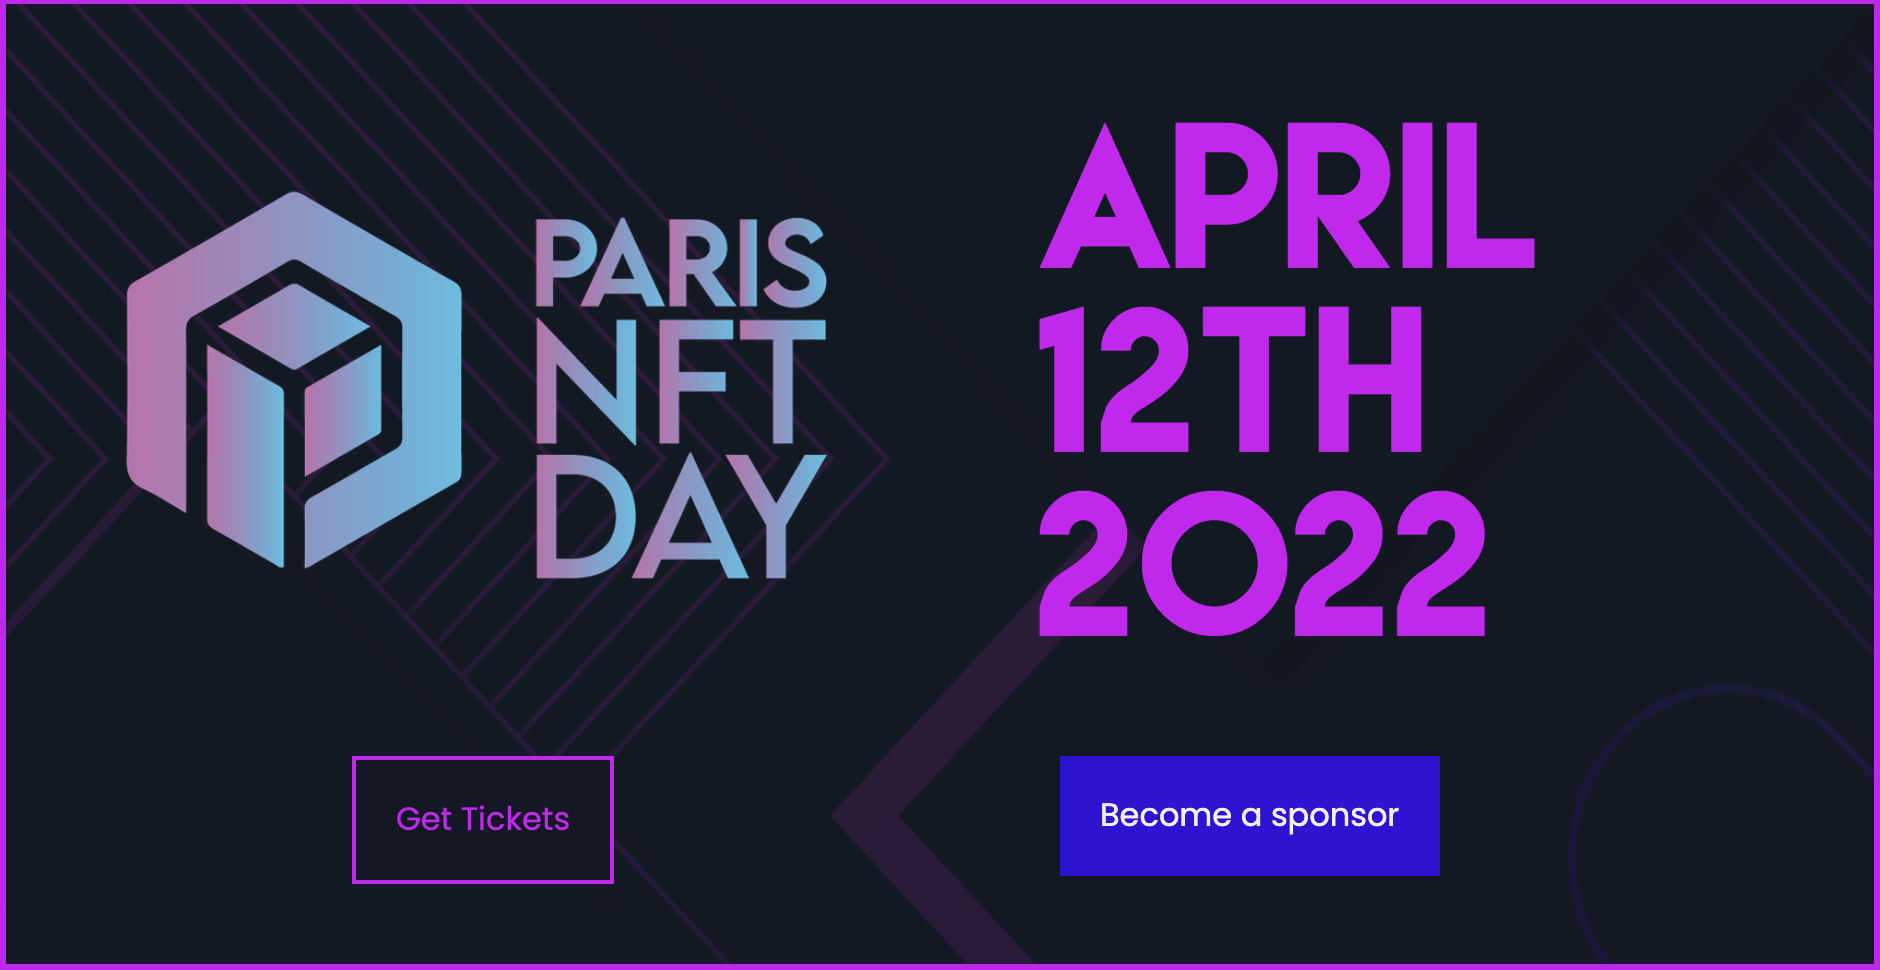 Paris NFT Day Set to Europe’s Largest NFT Dedicated Event